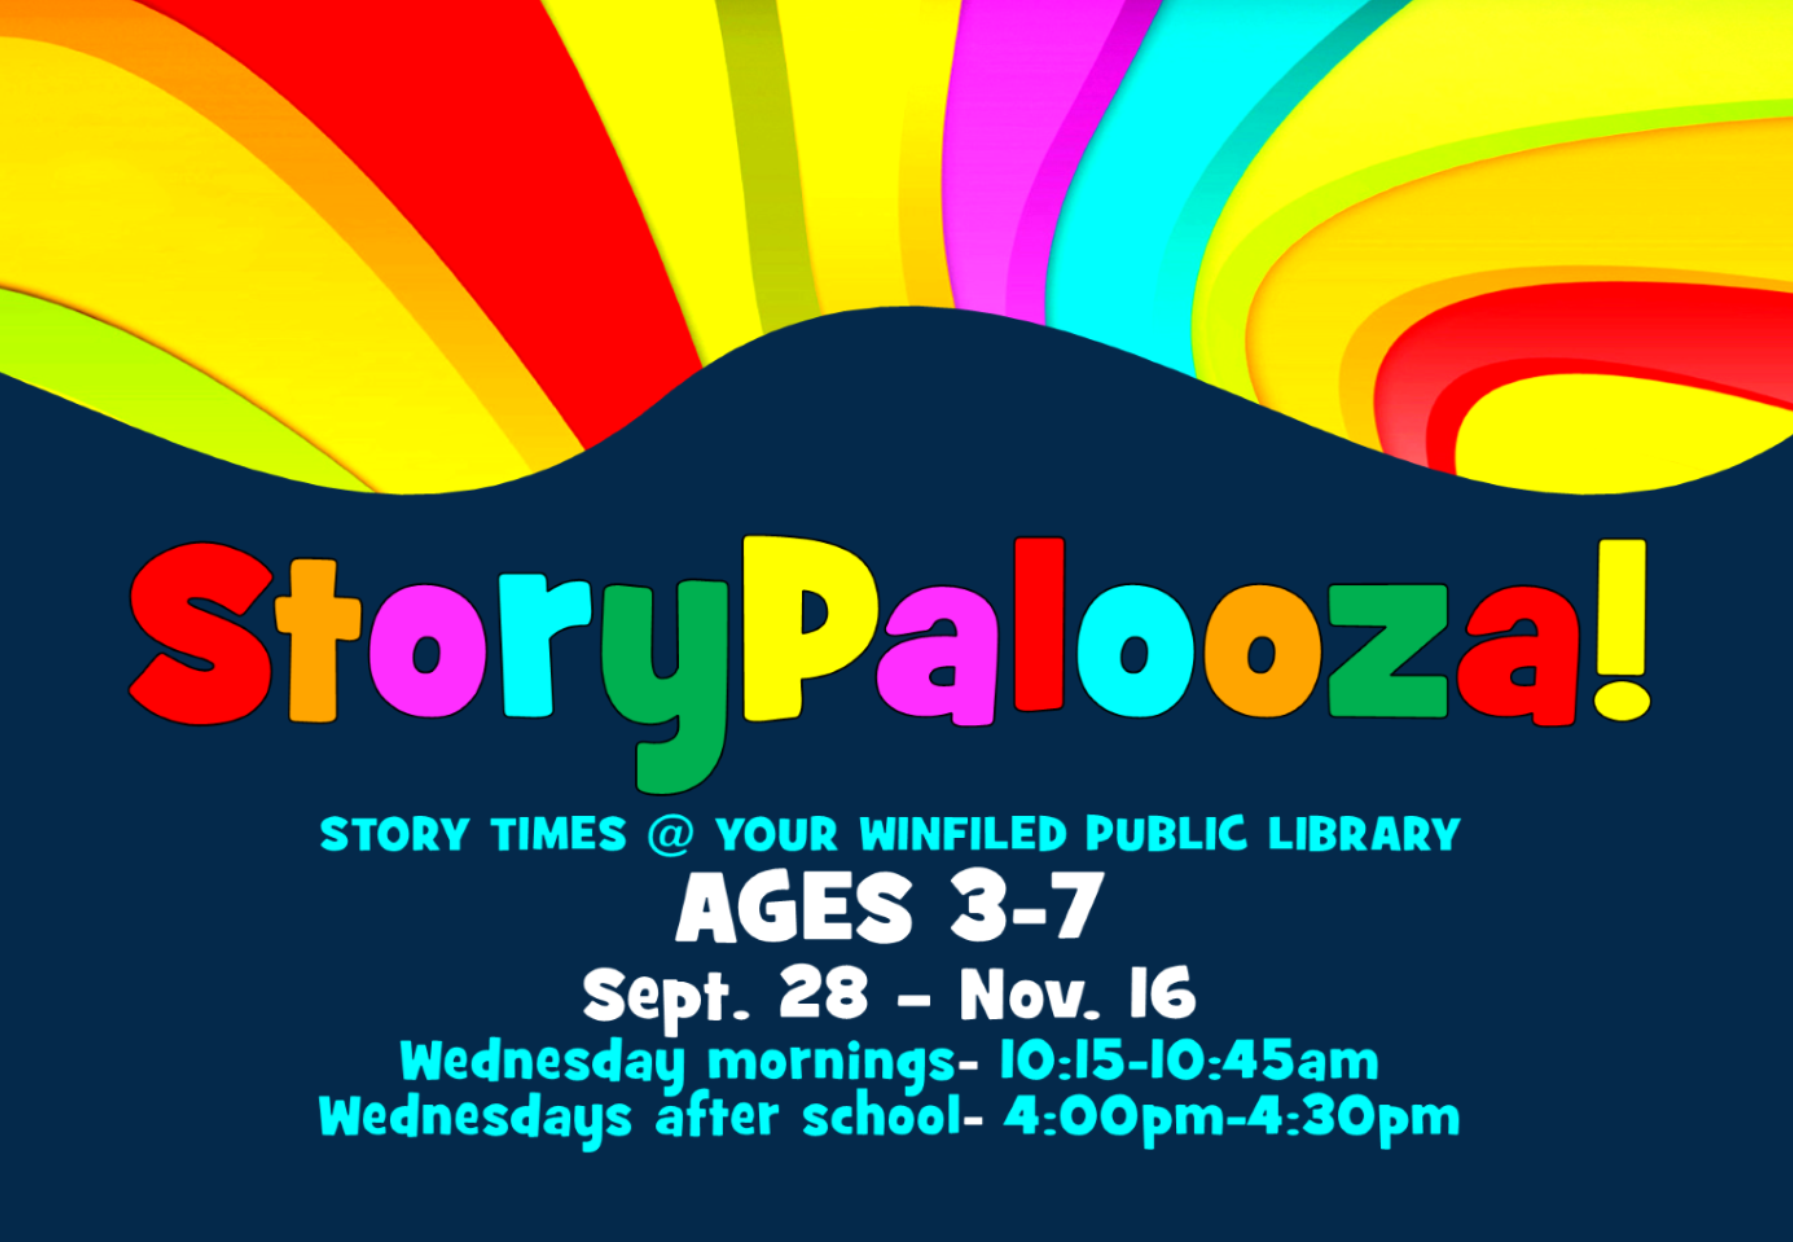 image is colorful StoryPalooza banner